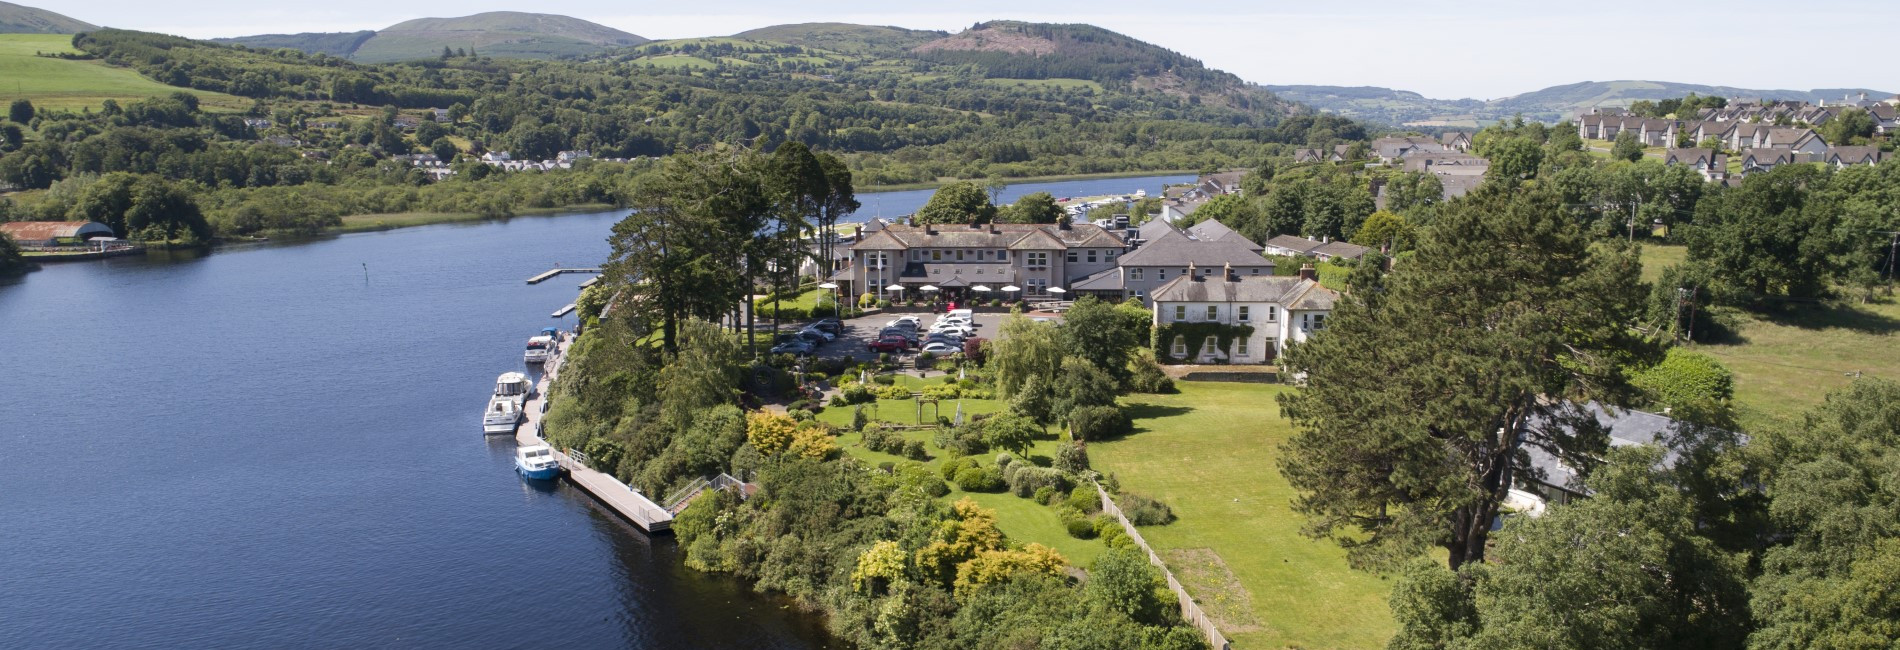 Dji The Lakeside Hotel and Leisure Centre